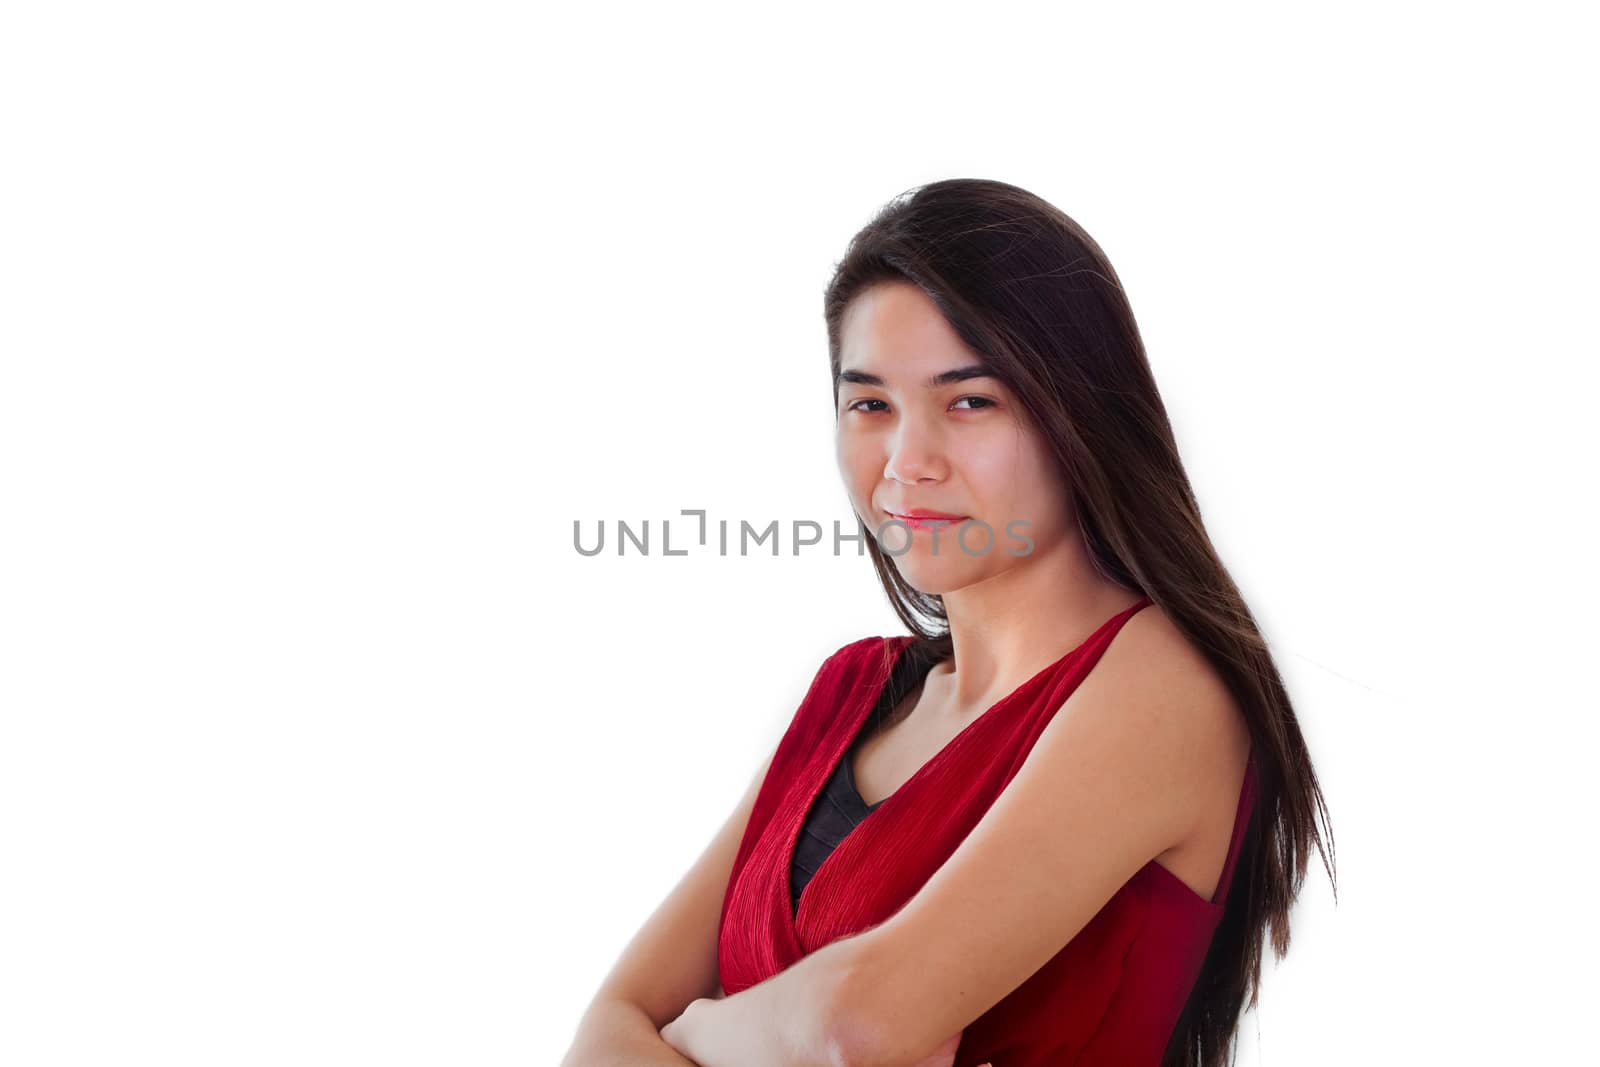 Beautiful biracial teen girl in red dress standing arms crossed, smiling. Challenging expression